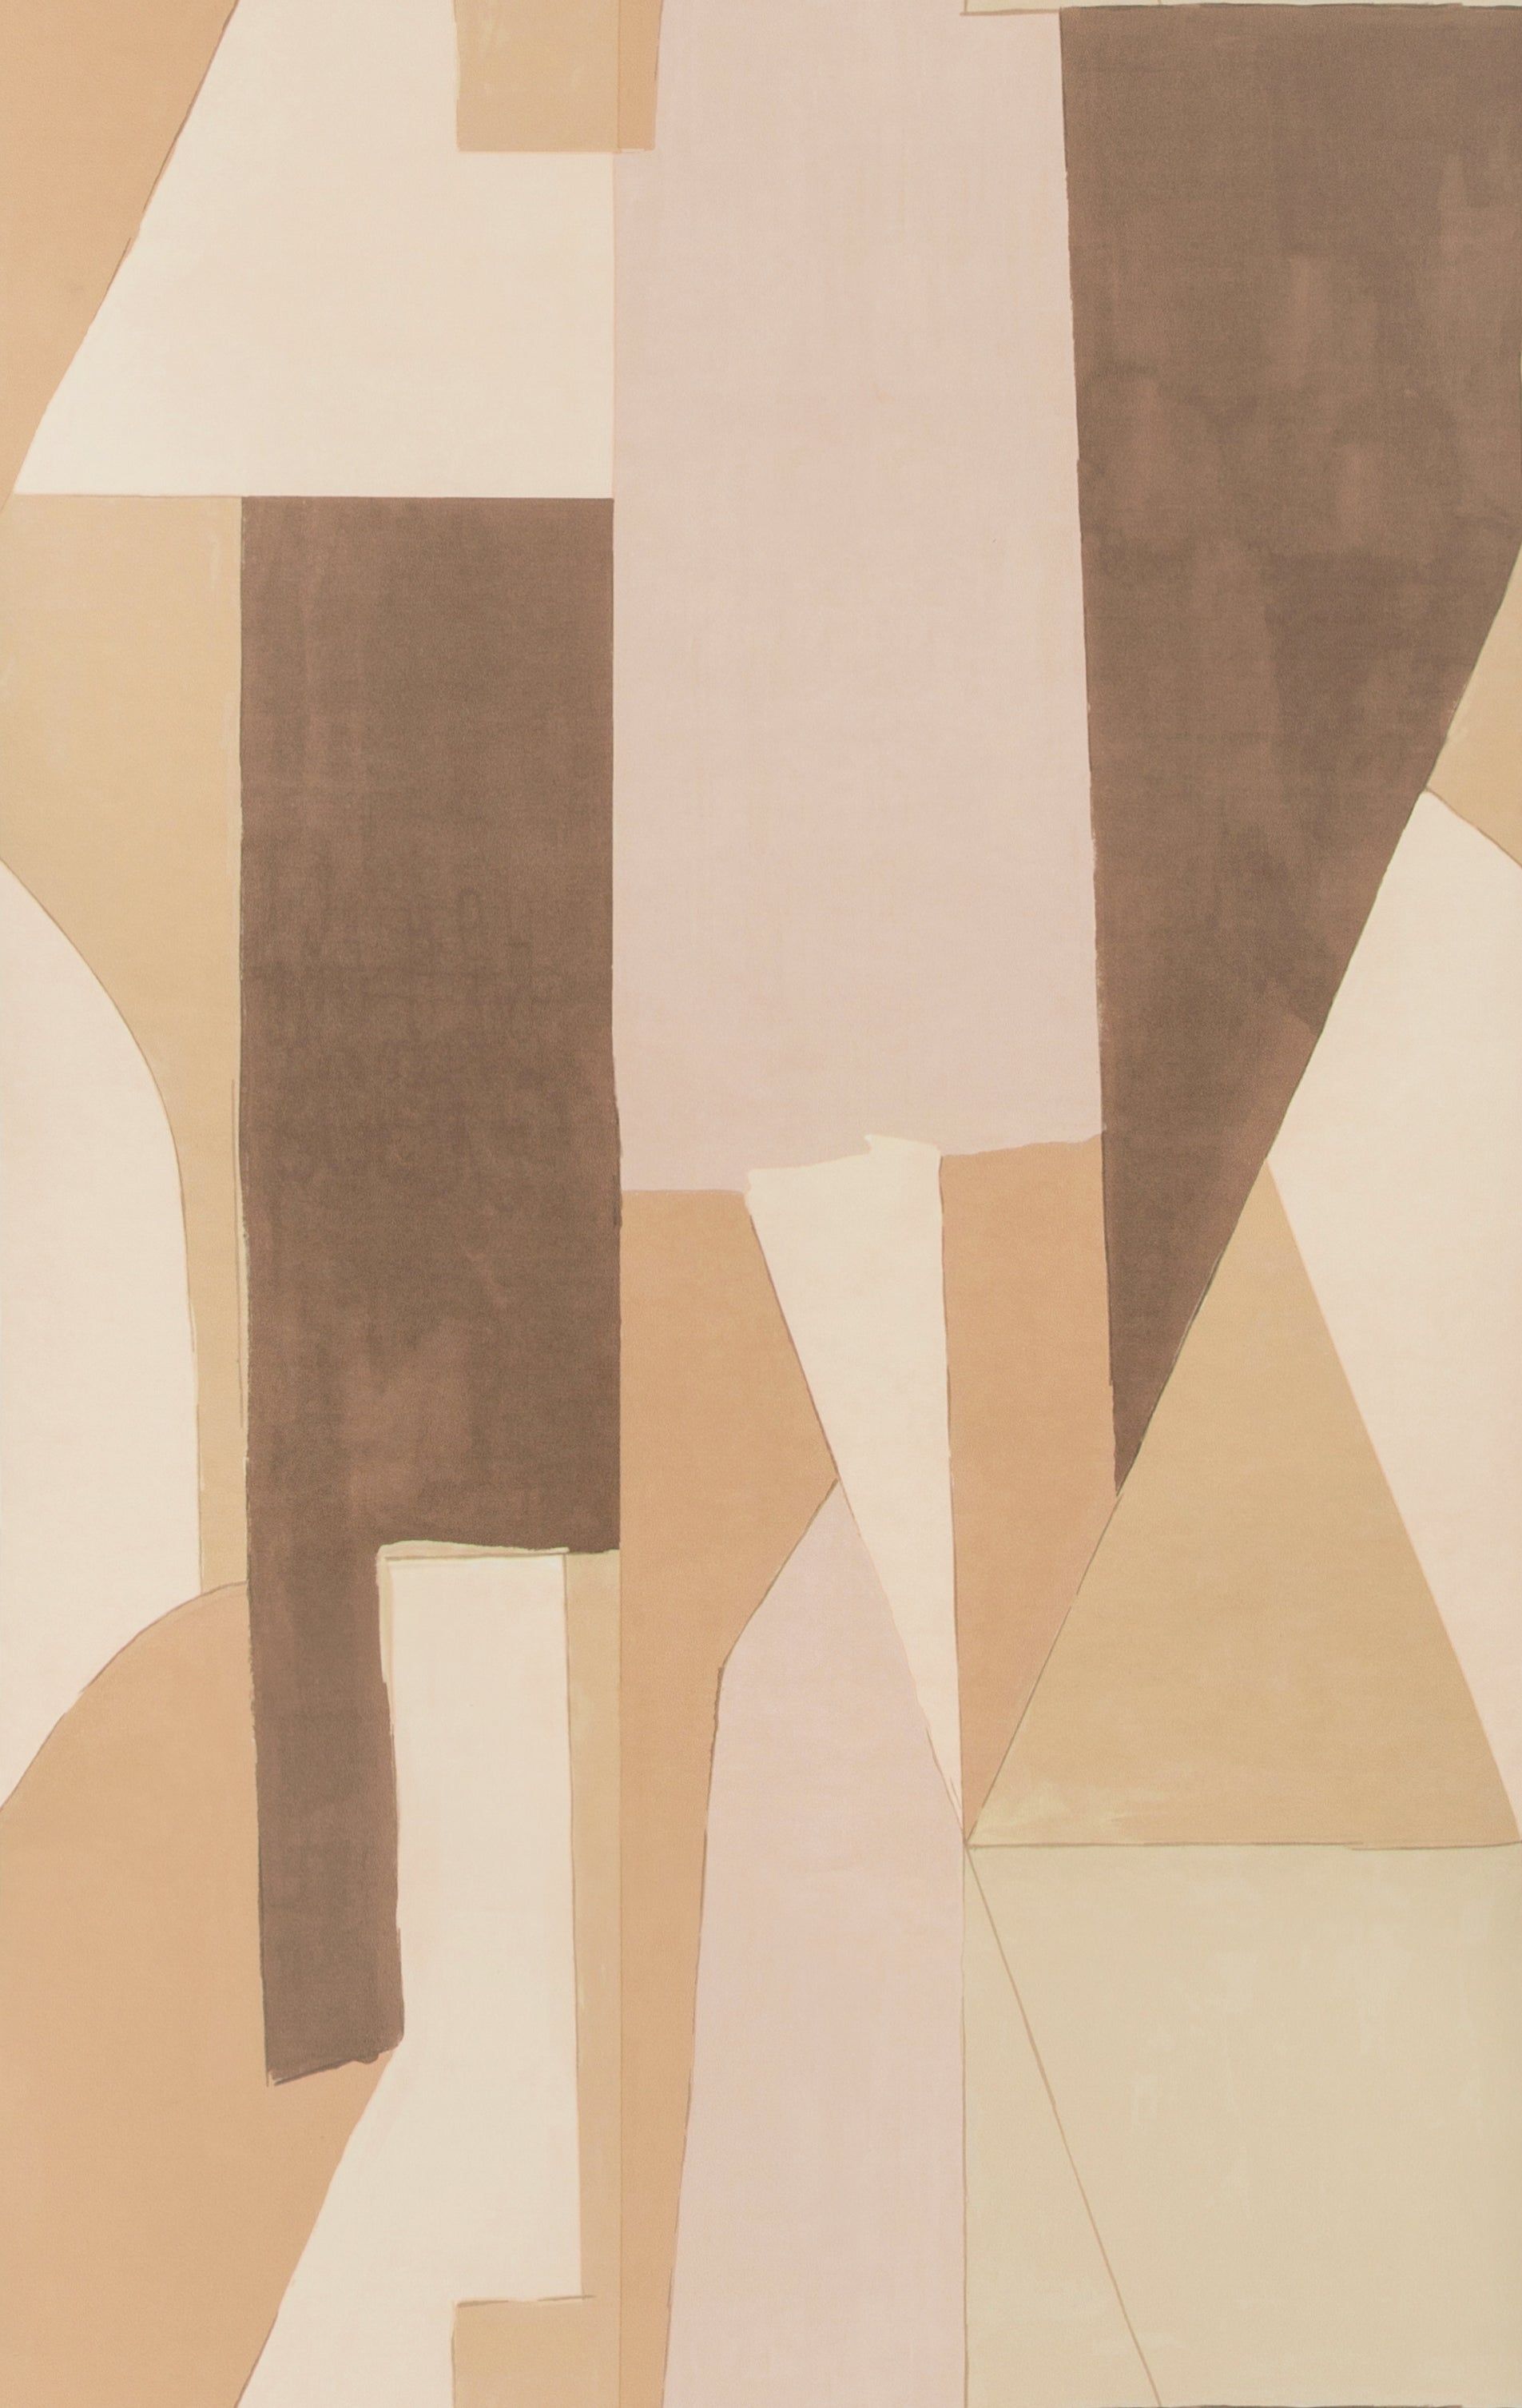 A painting with brown and beige shapes - Paper